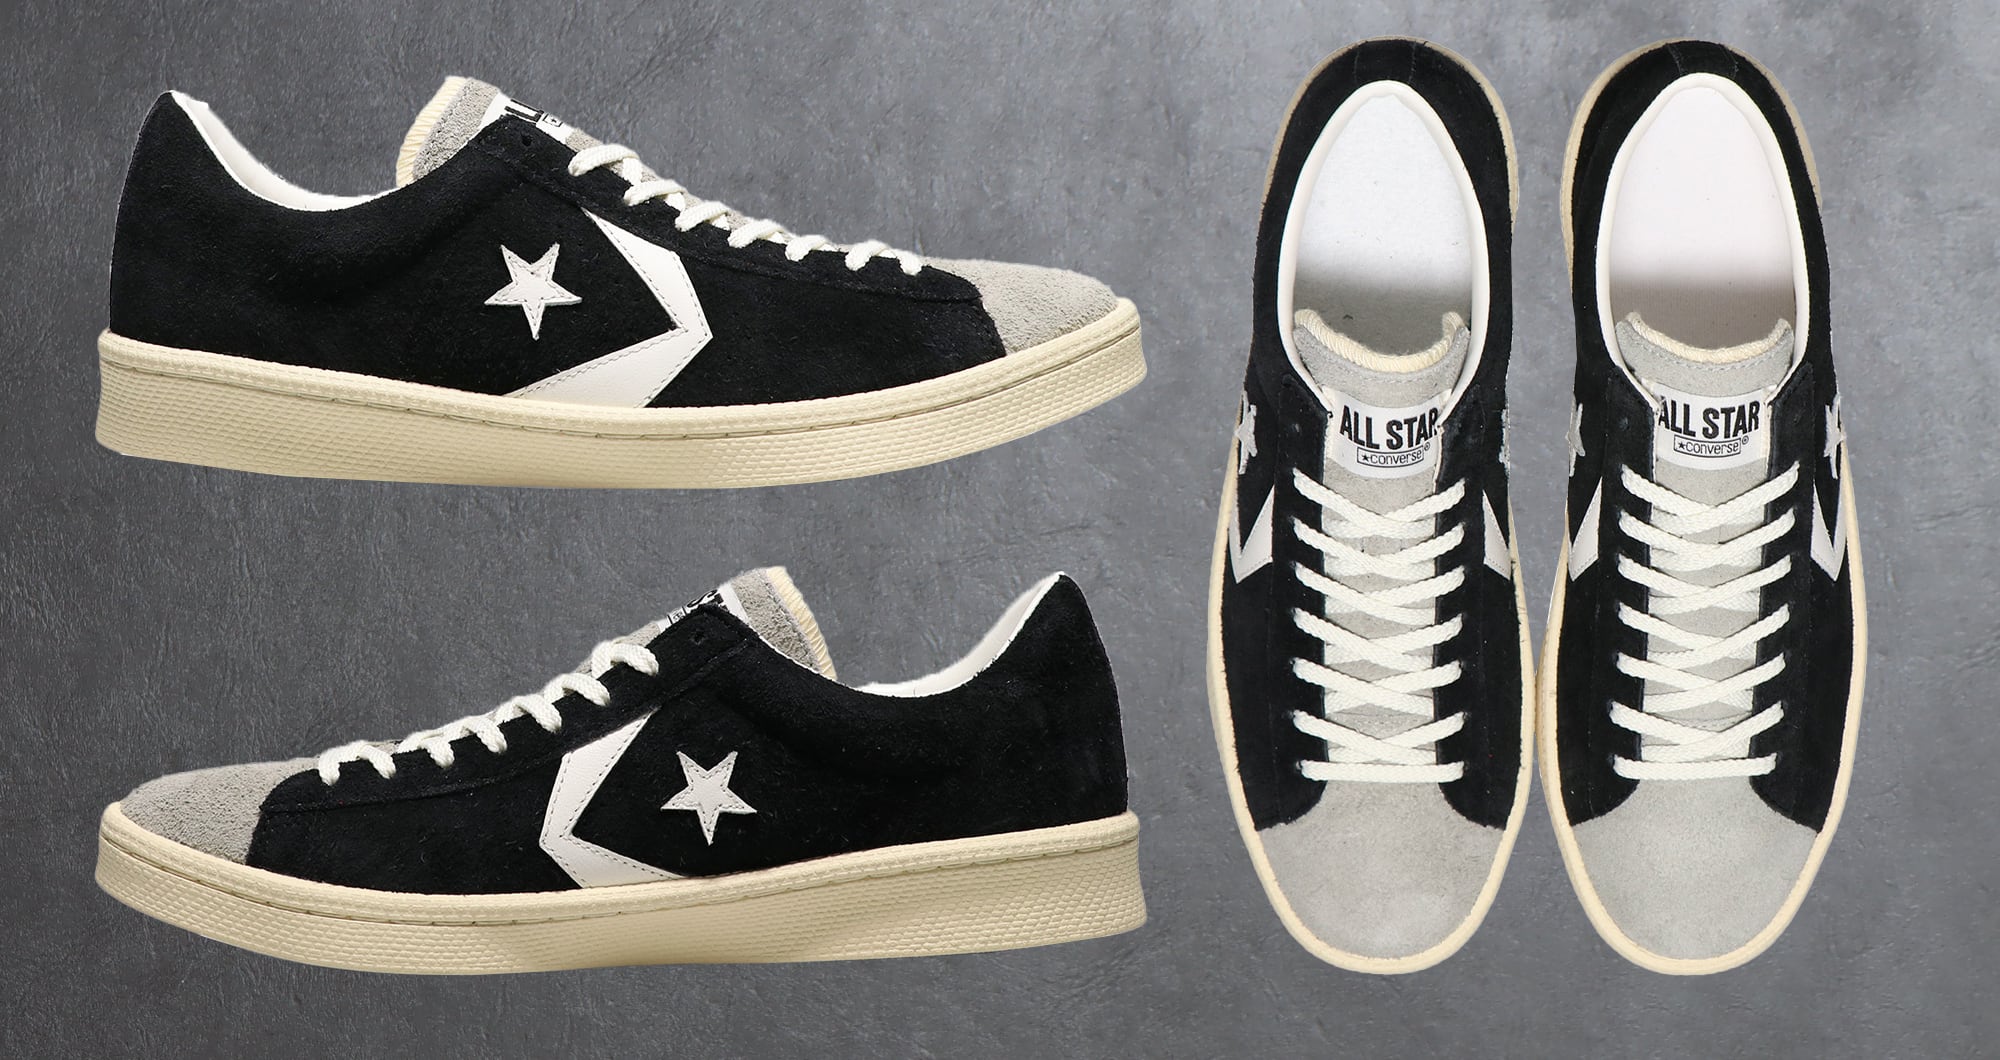 SOMA × CONVERSE PRO LEATHER VTG SUEDE OX - スニーカー